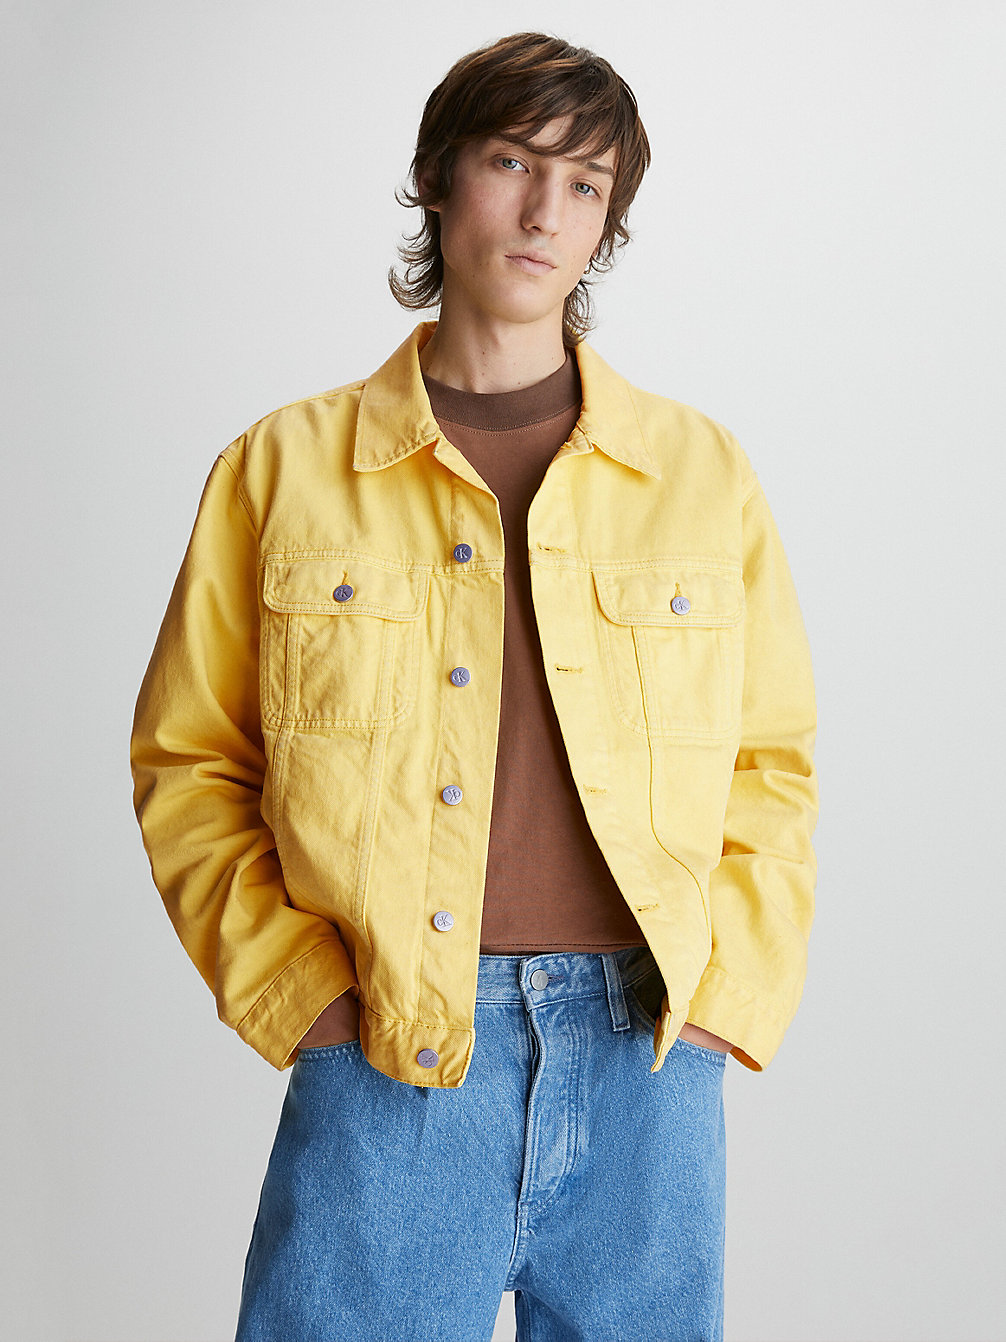 PRIMROSE YELLOW Giacca Di Jeans Taglio Relaxed Unisex undefined unisex Calvin Klein